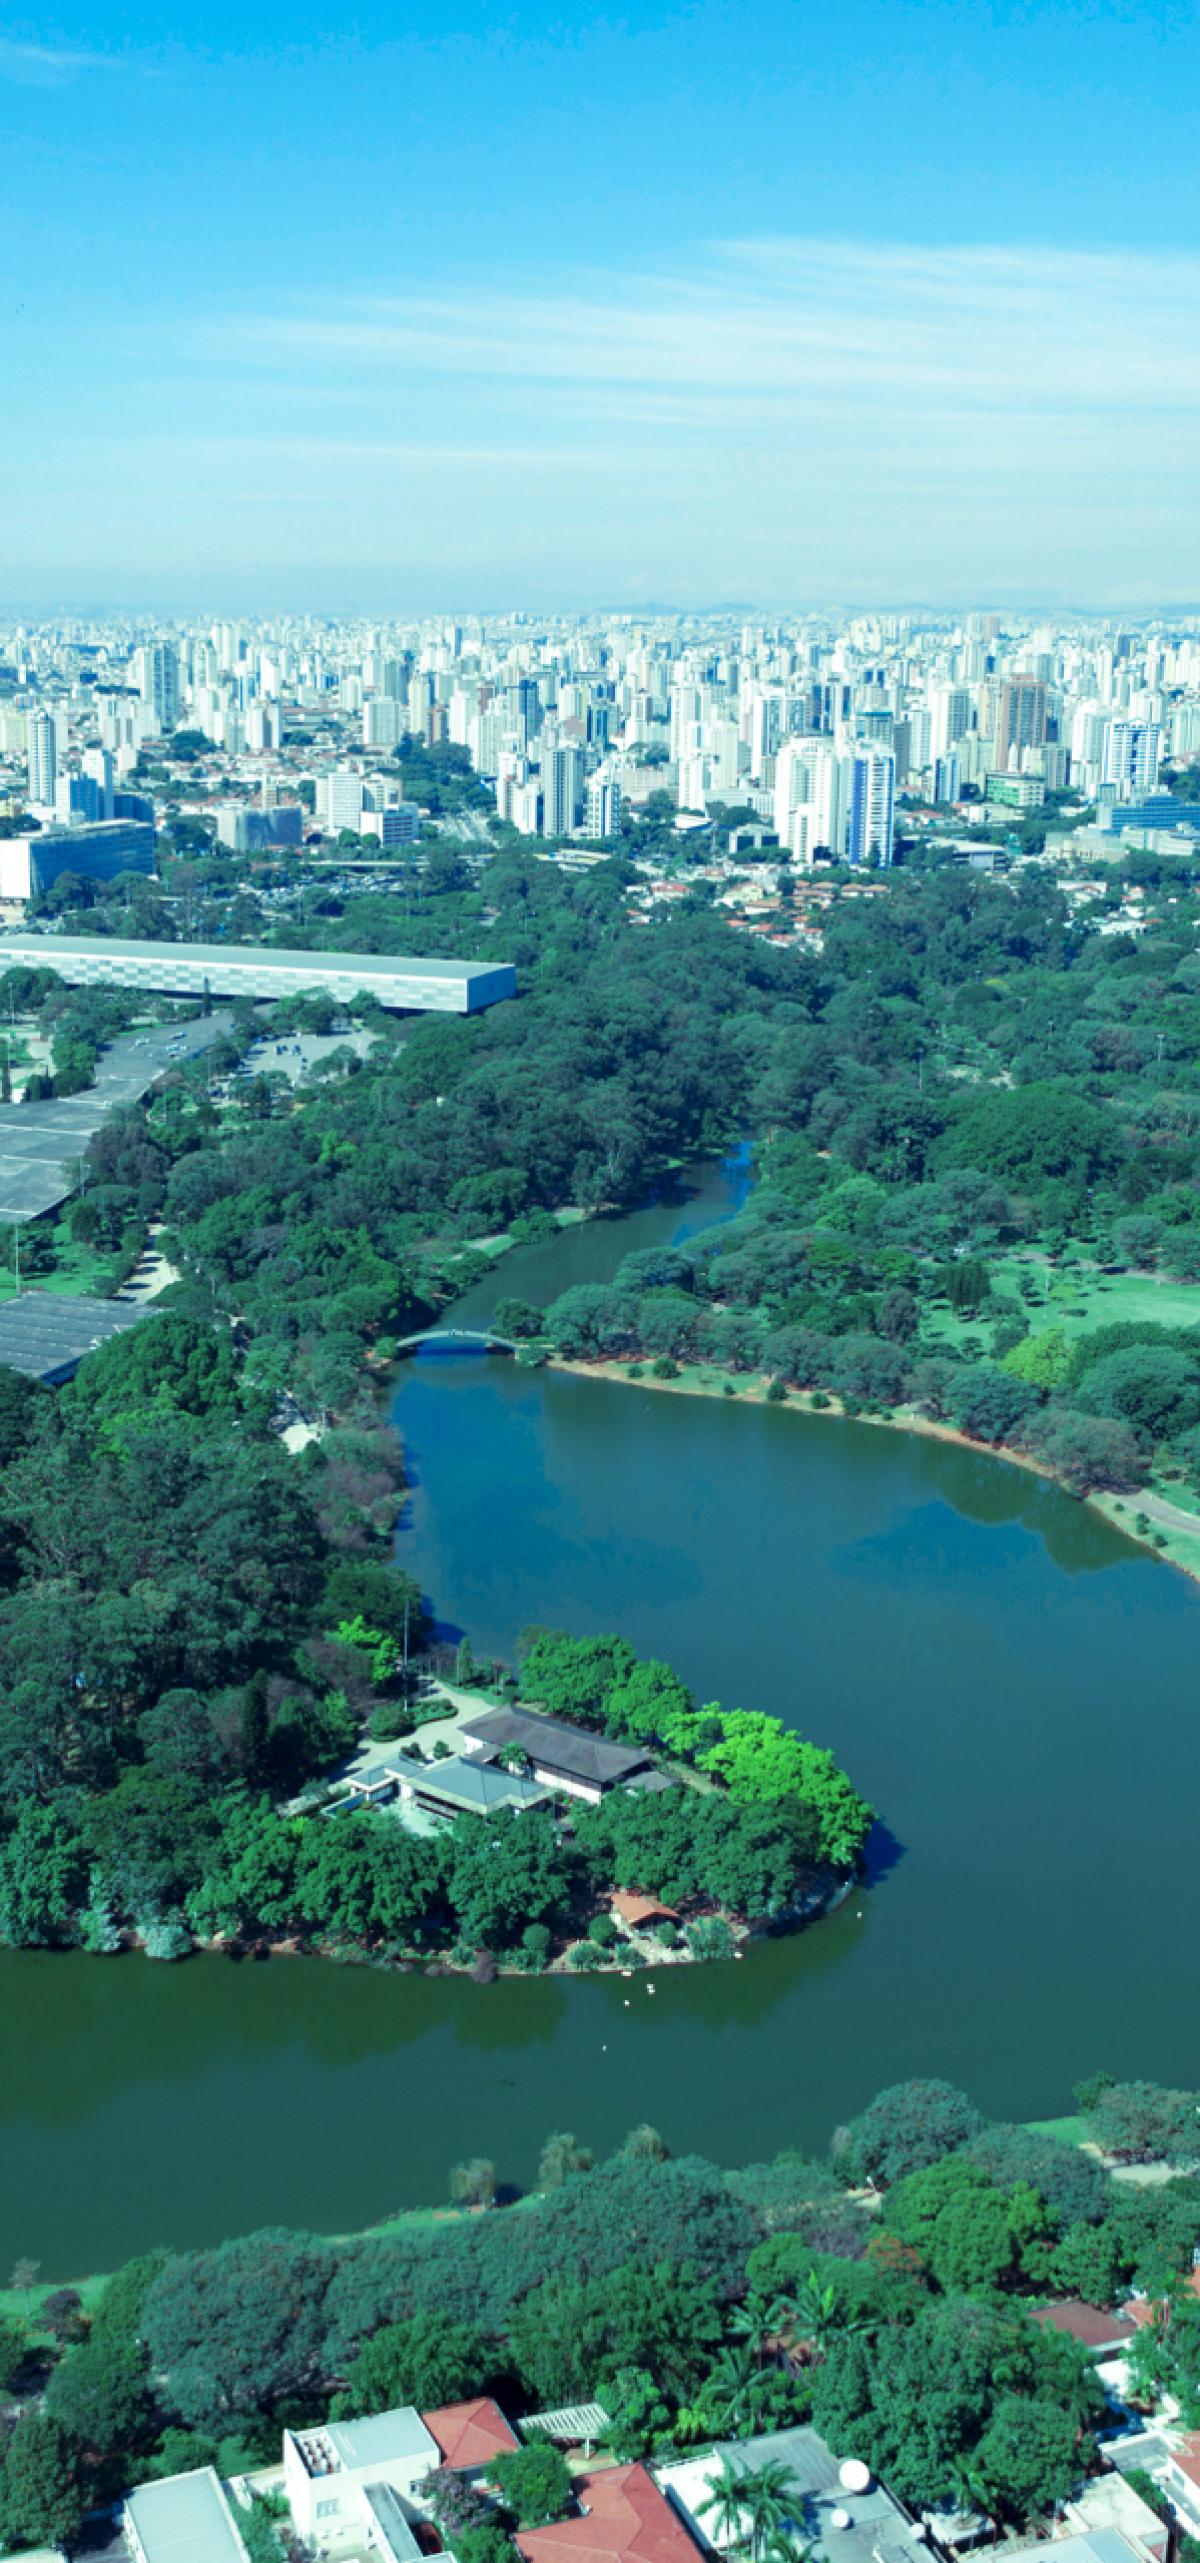 Largest and oldest city park in São Paulo: Parque do Ibirapuera